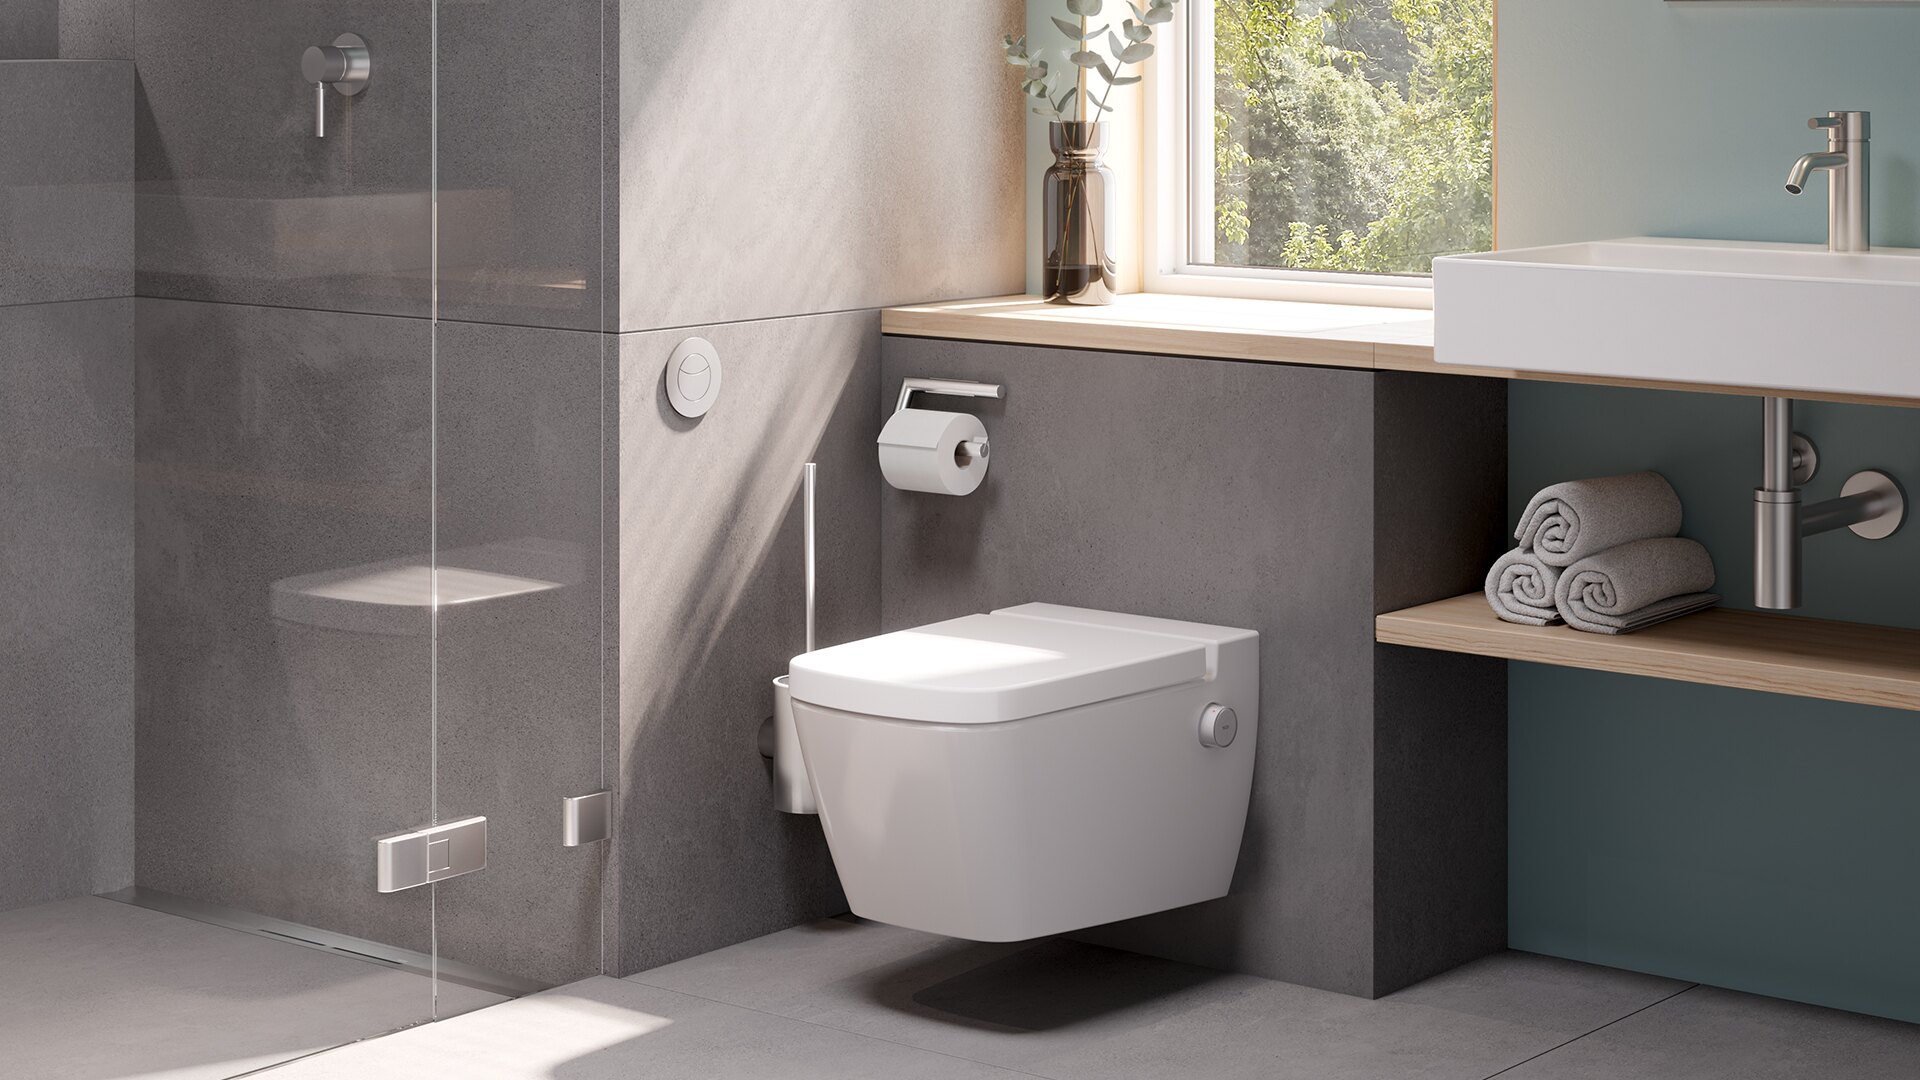 TECEflushpoint and the TECEconsruct toilet module with only 750 mm installation height enable new design choices.